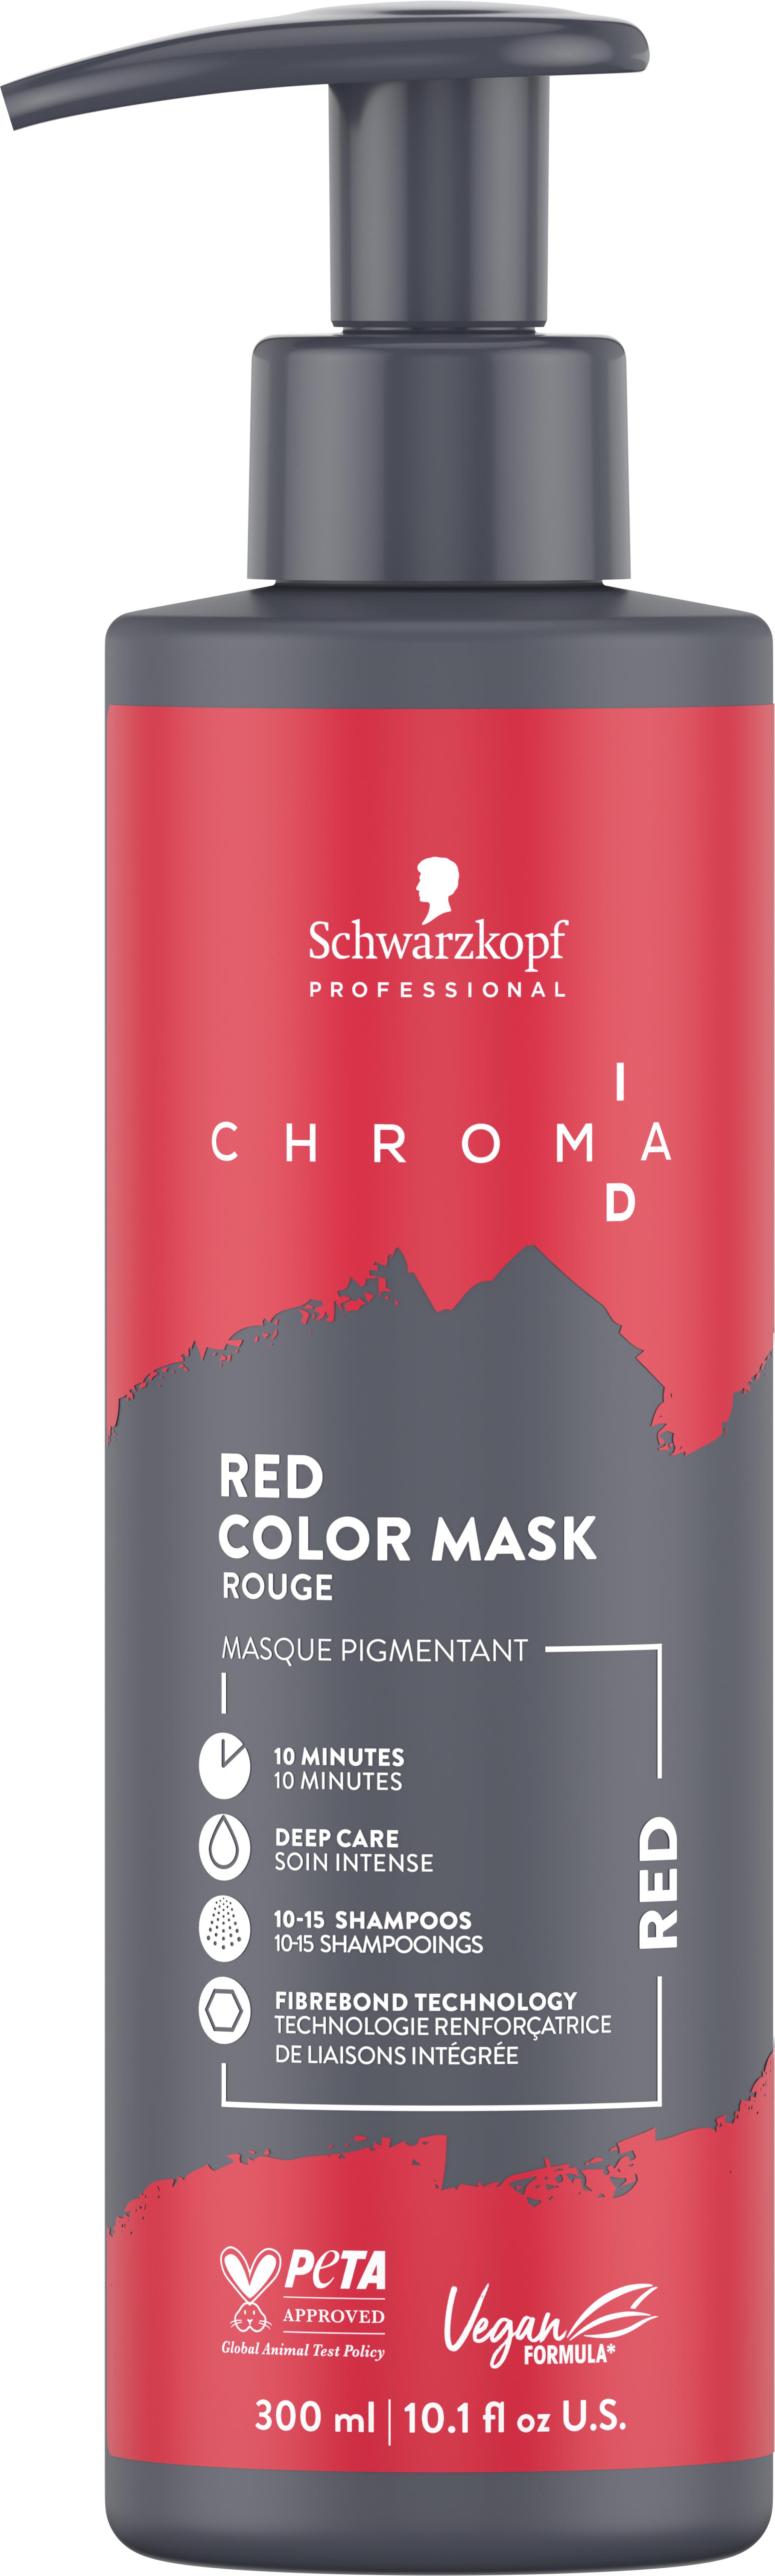 Chroma ID - Bonding Color Mask Red